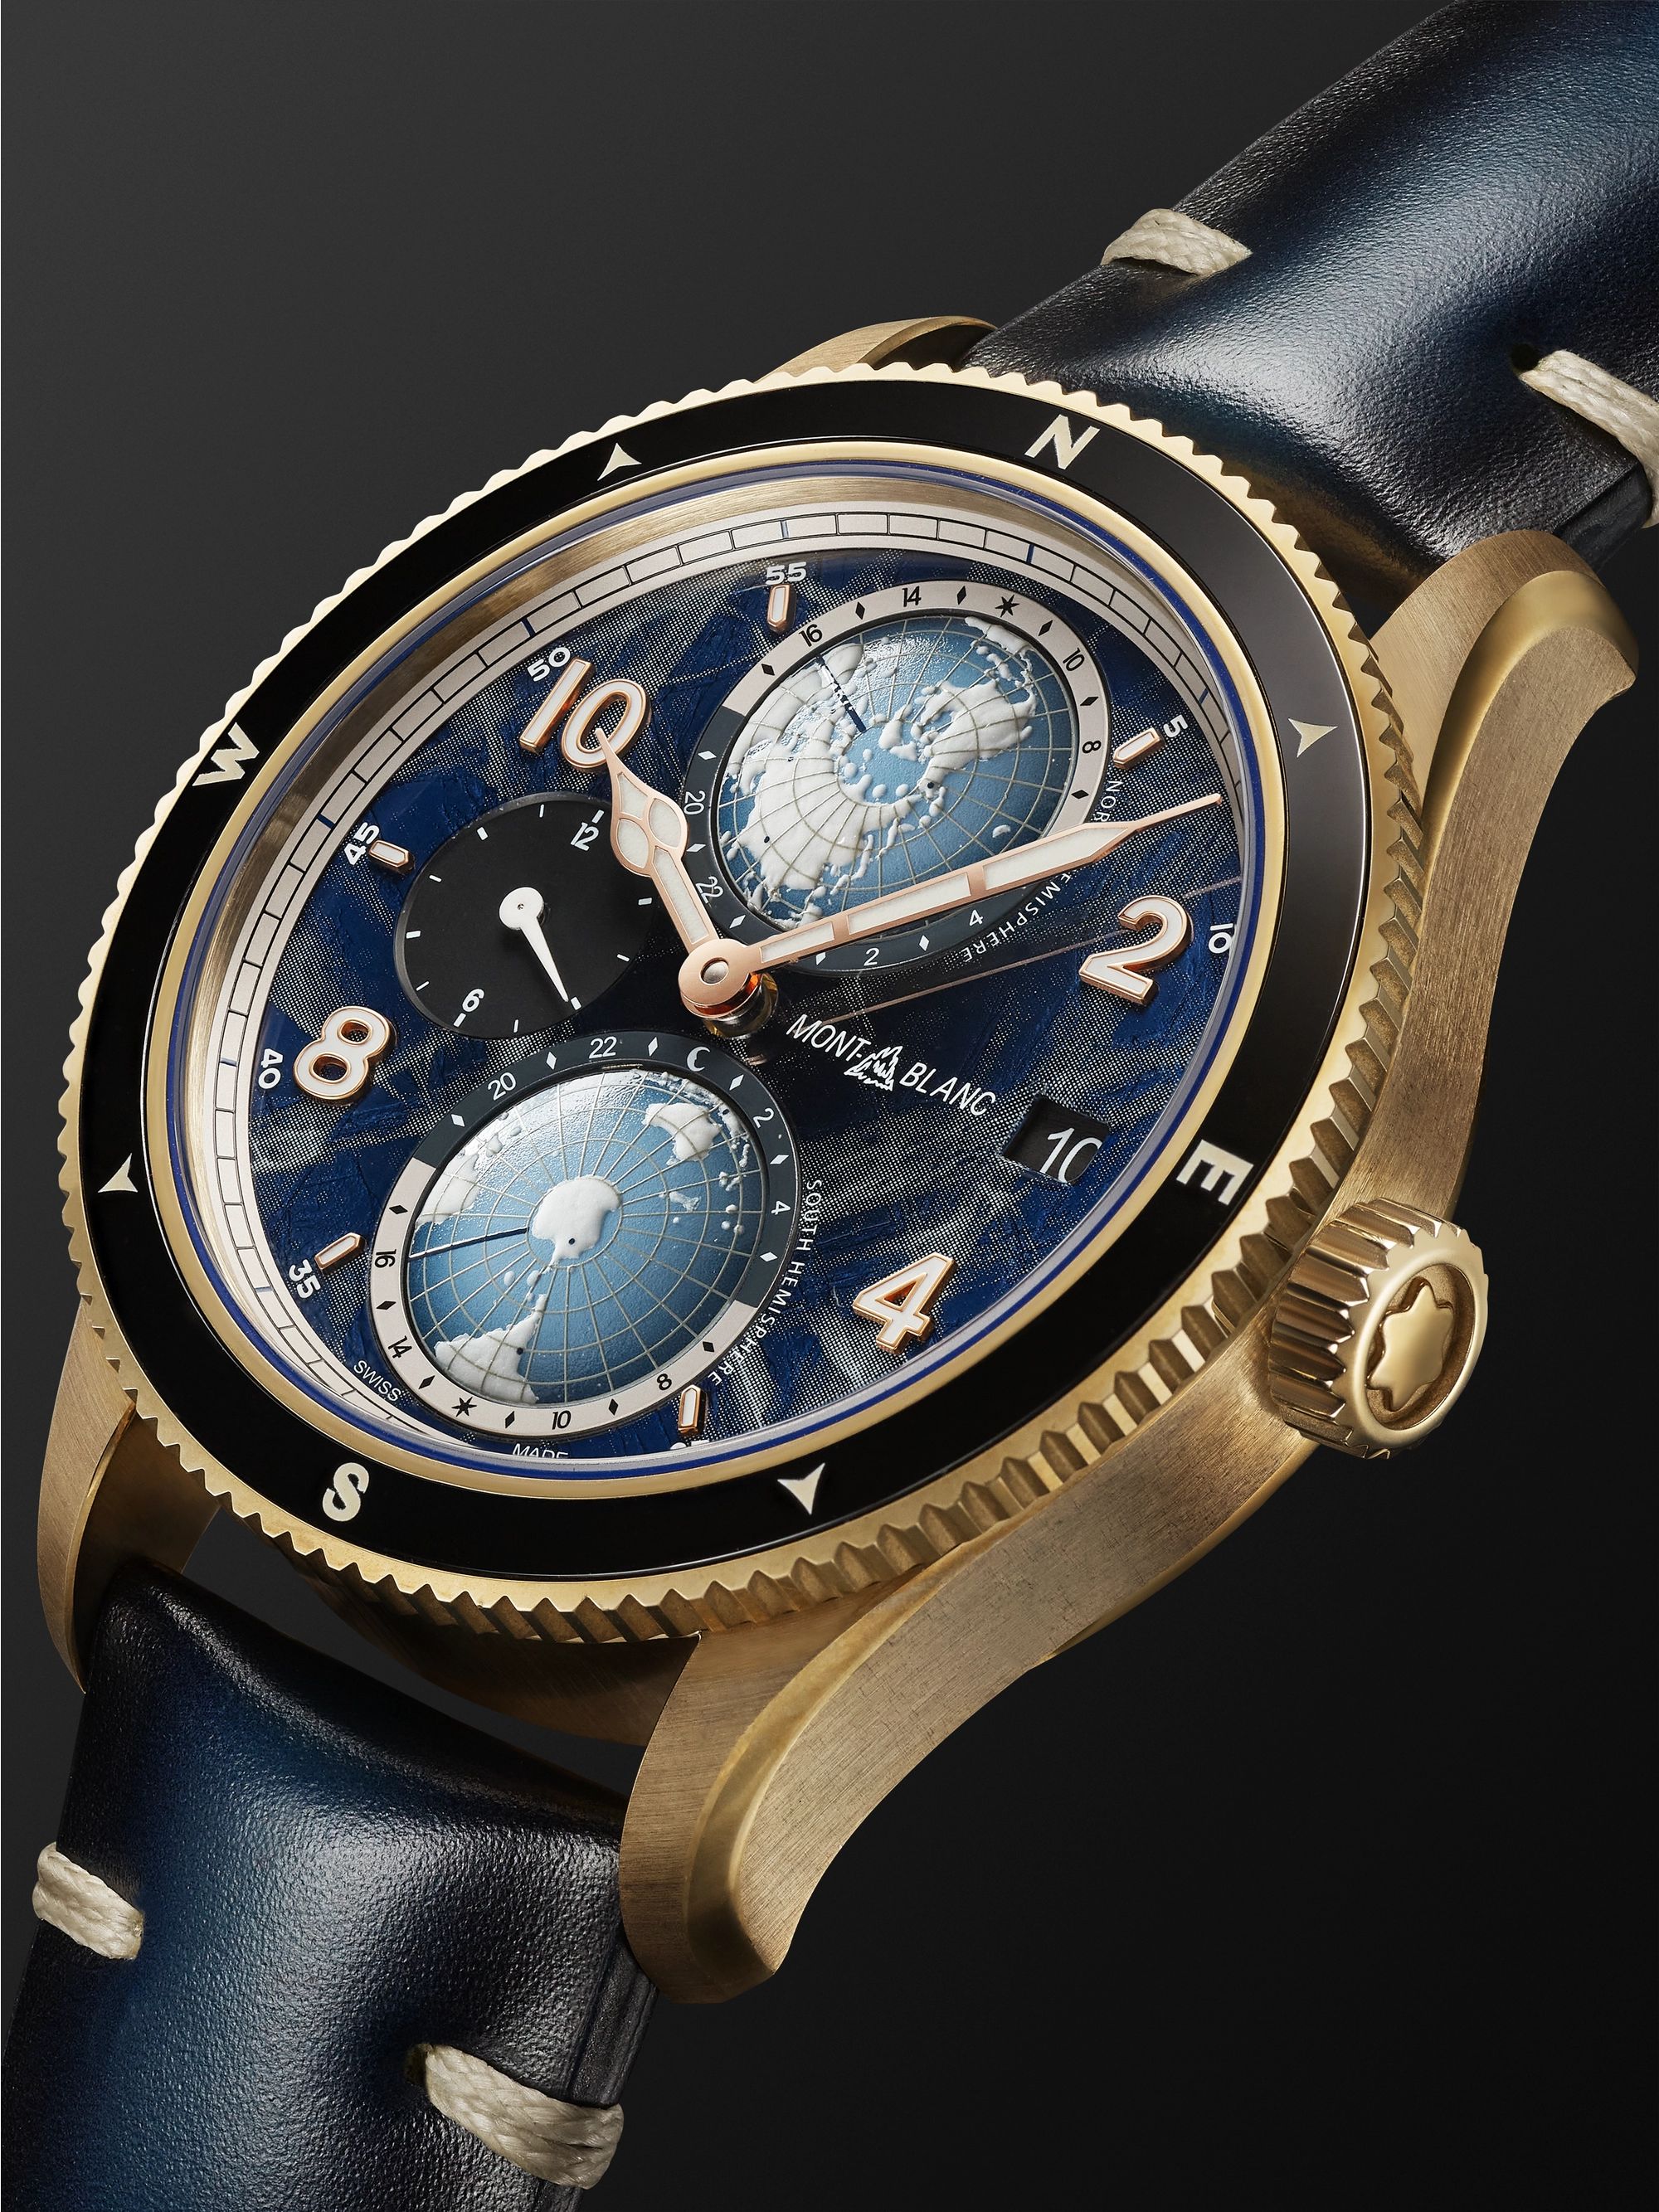 MONTBLANC 1858 Geosphere 0 Oxygen Limited Edition Automatic GMT 42mm Bronze, Ceramic and Leather Watch, Ref. No. 129415